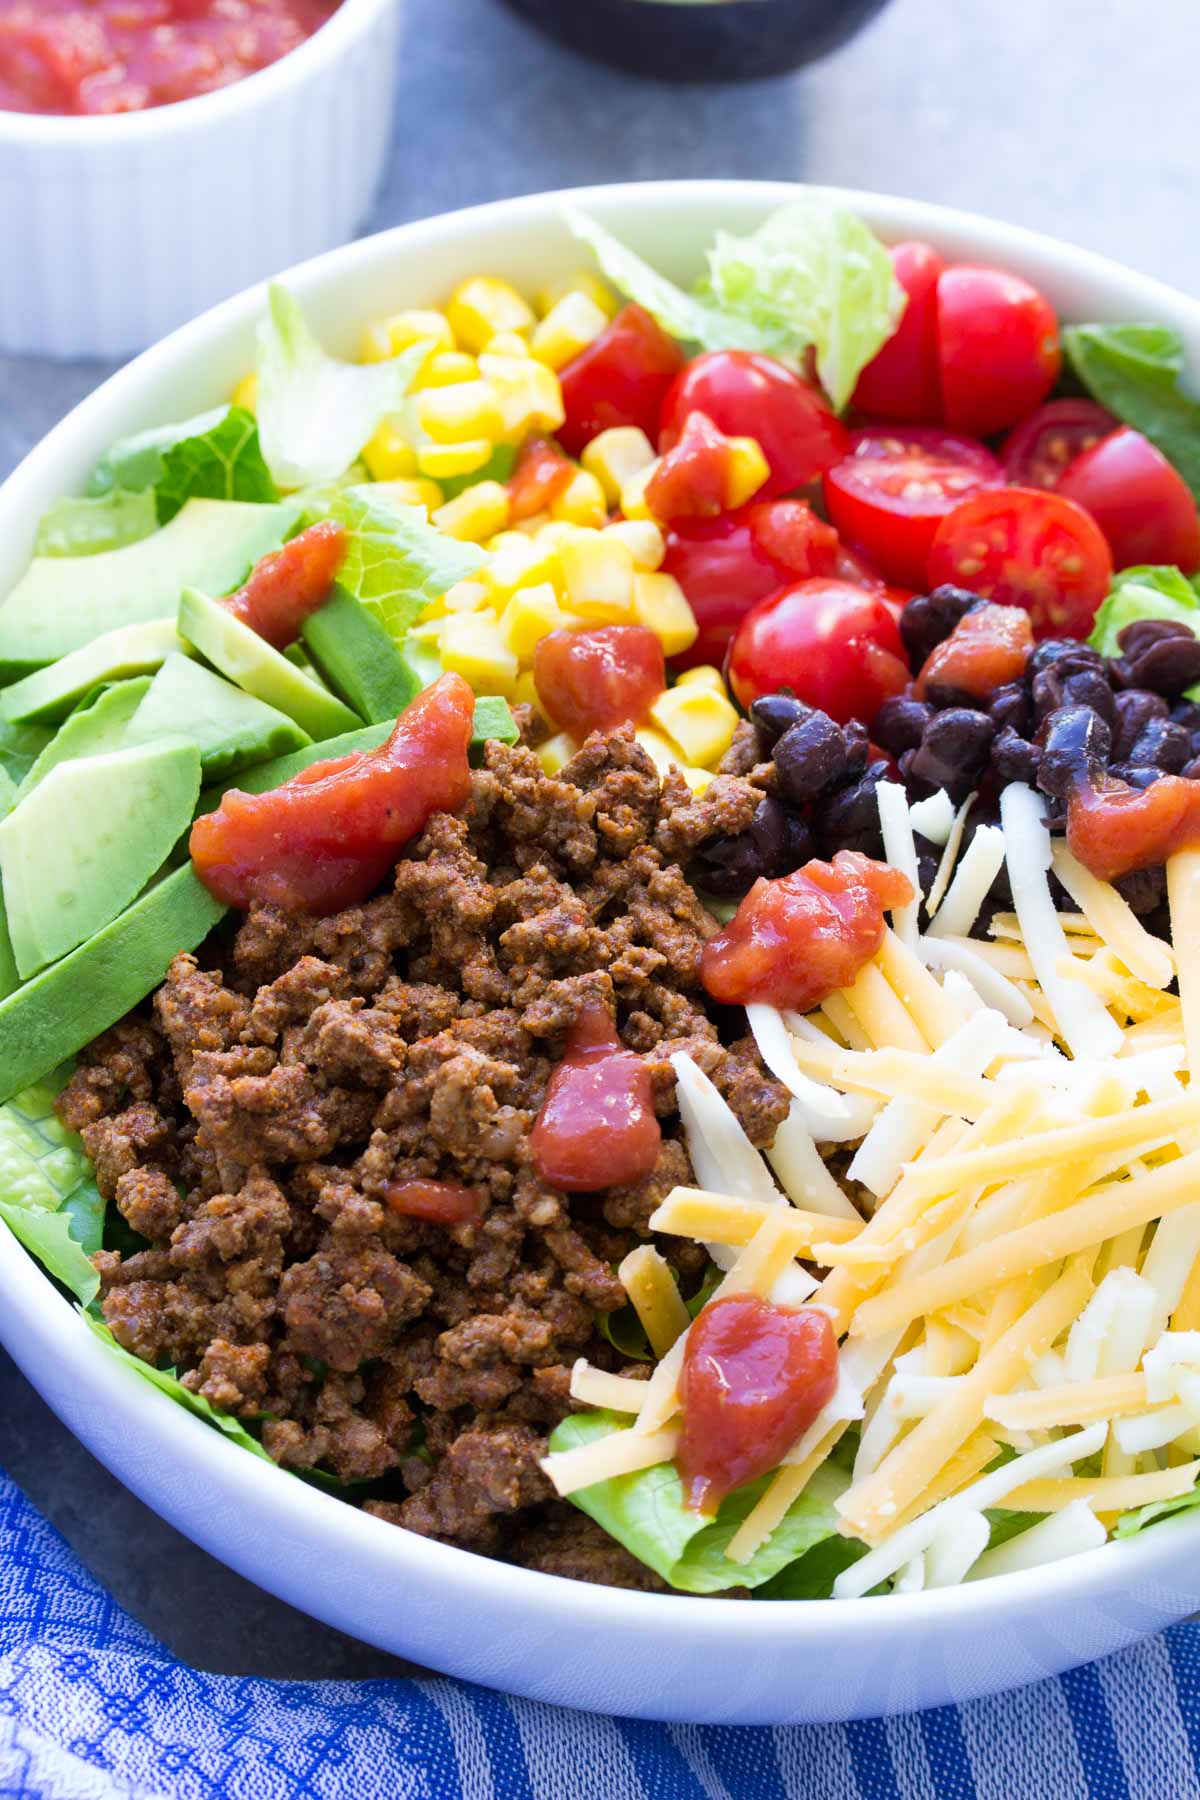 Taco salad with ground beef in a bowl.